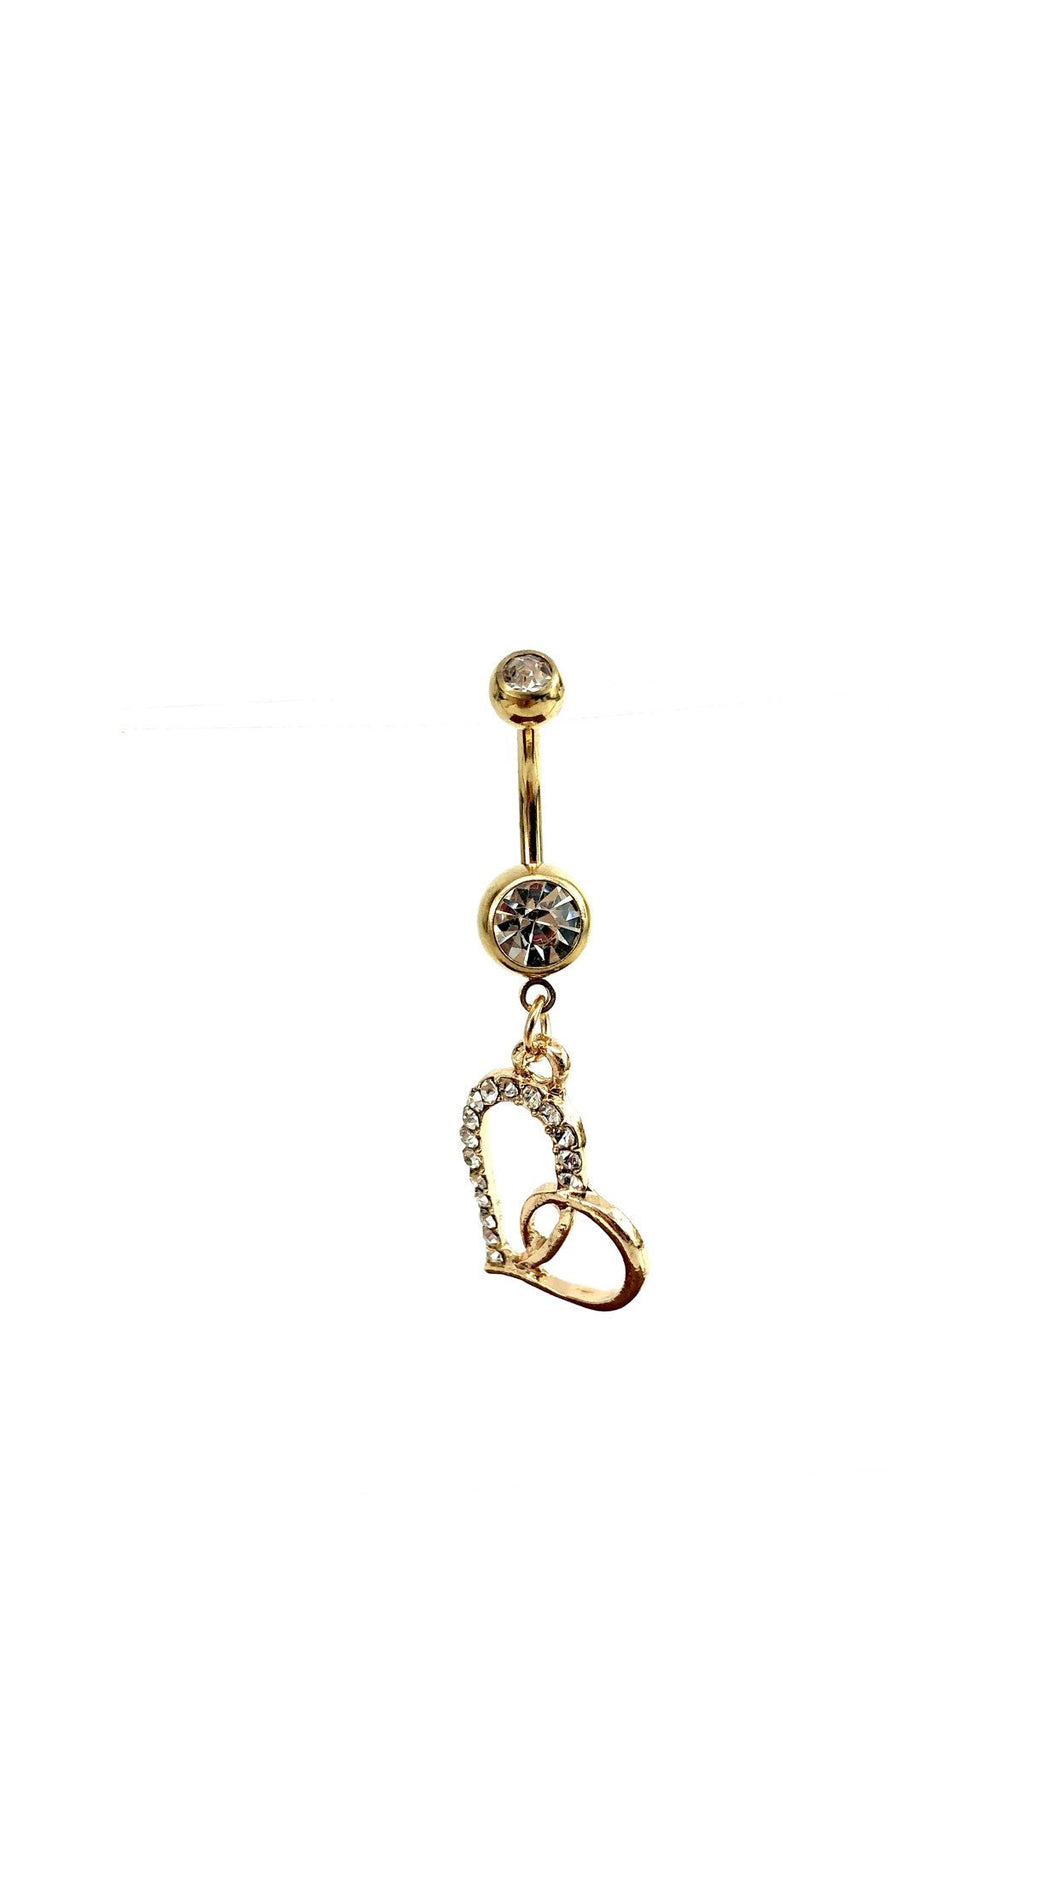 Stainless steel curve bar , double heart gem belly ring, SKU# NBR062